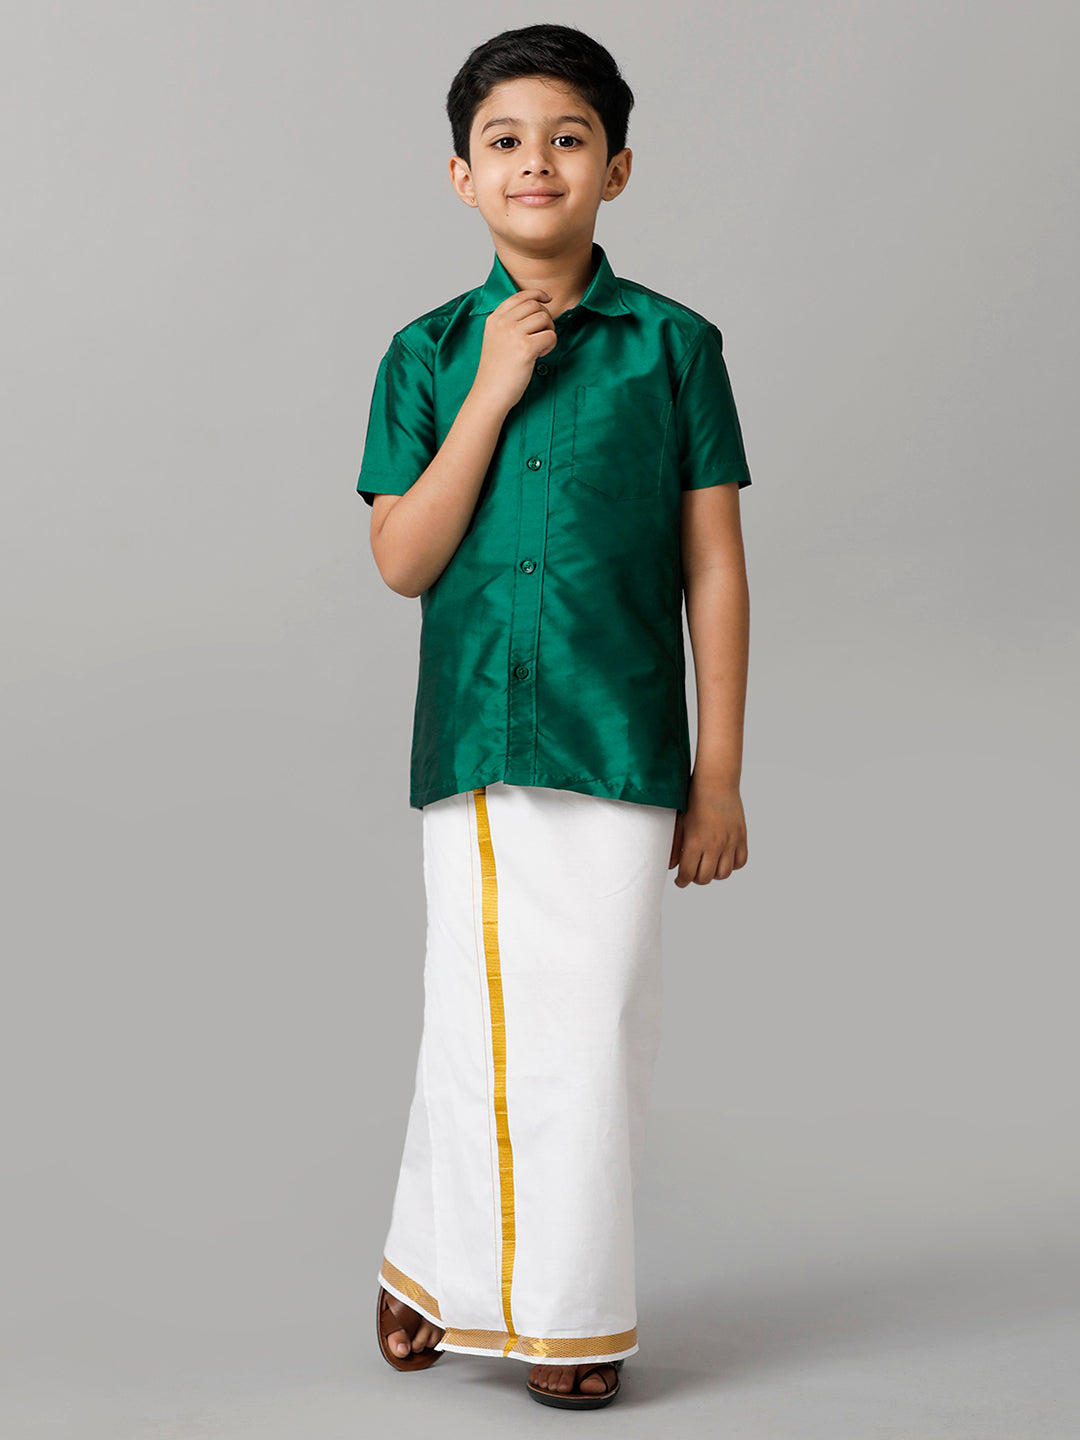 Boys Silk Cotton Green Half Sleeves Shirt with Adjustable White Dhoti Combo K9-Front view